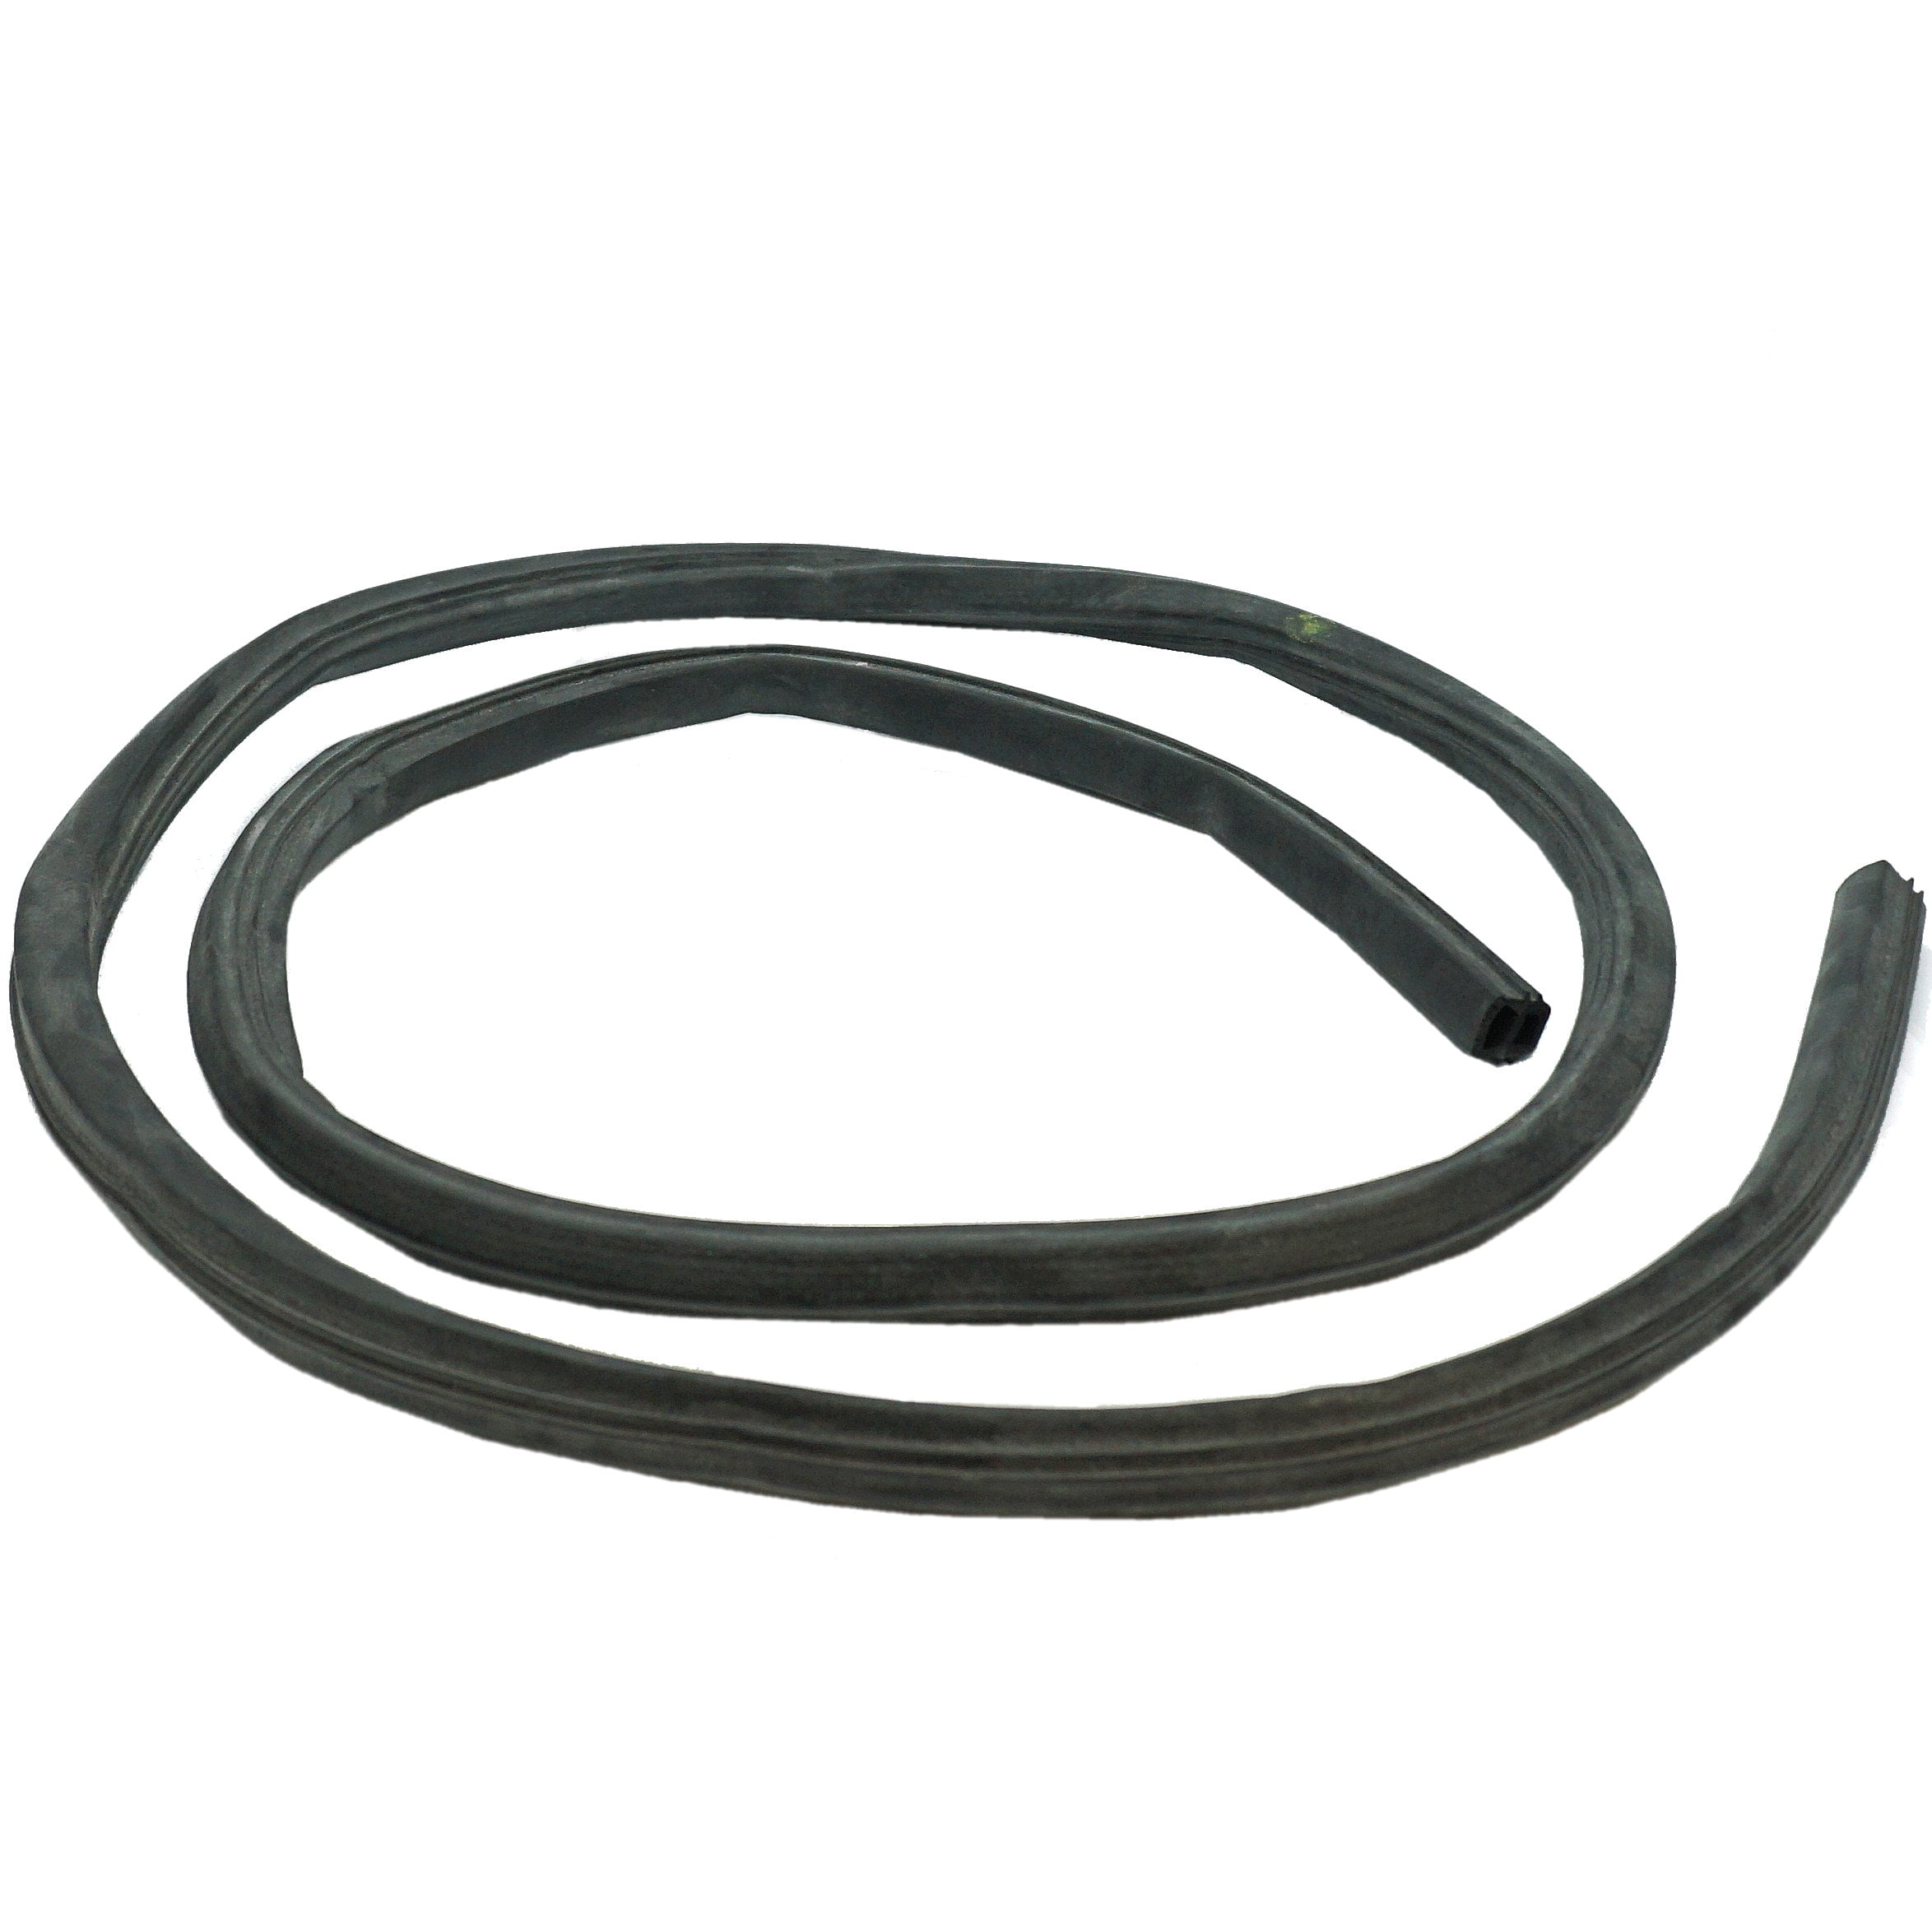 PS11755935 AP6022601 W10524469 Details about   ERP Dishwasher Door Gasket for Whirlpool 